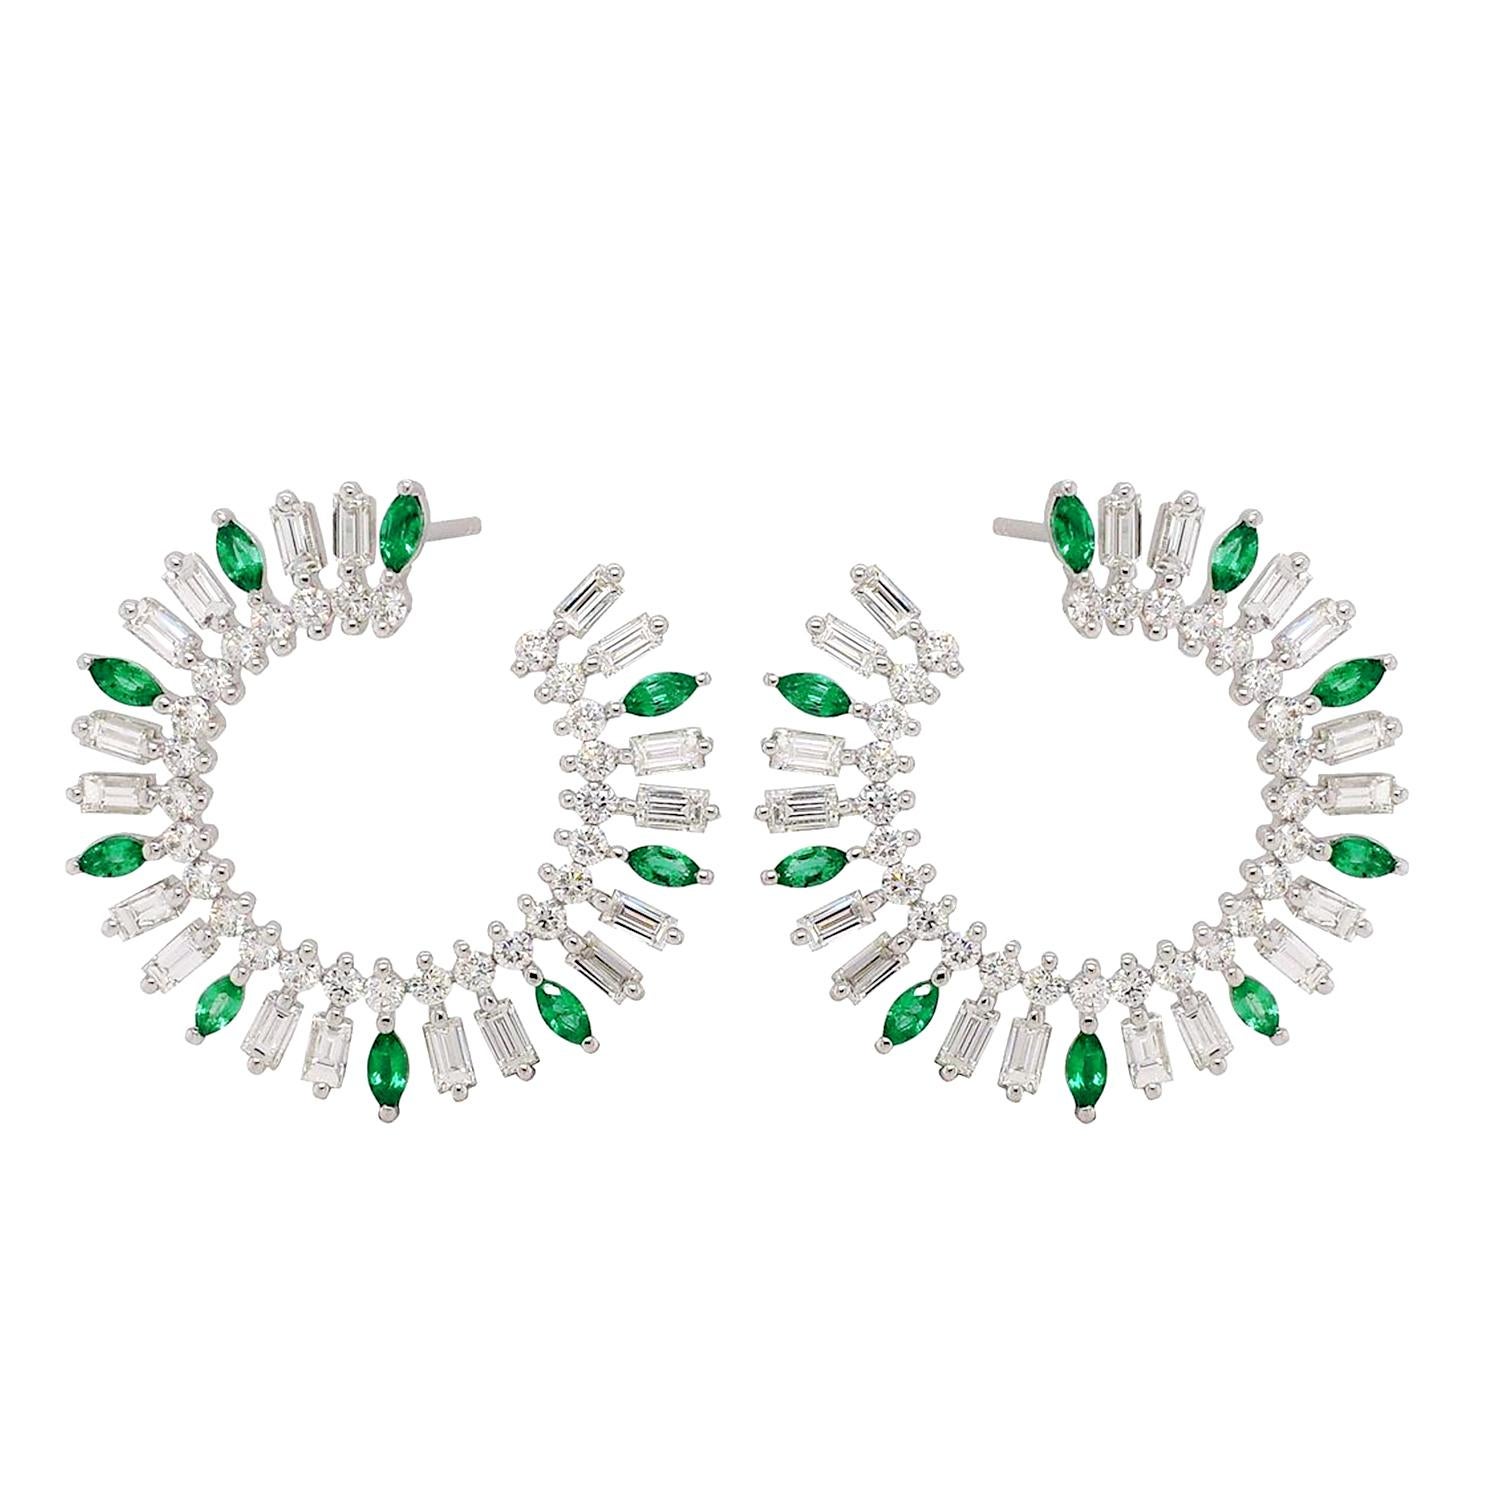 These exquisite Baguette Shaped Emerald & Diamonds Hoops crafted in 18k White Gold combine classic elegance with a contemporary twist. The hoops are meticulously designed to showcase a seamless blend of precious gemstones and fine